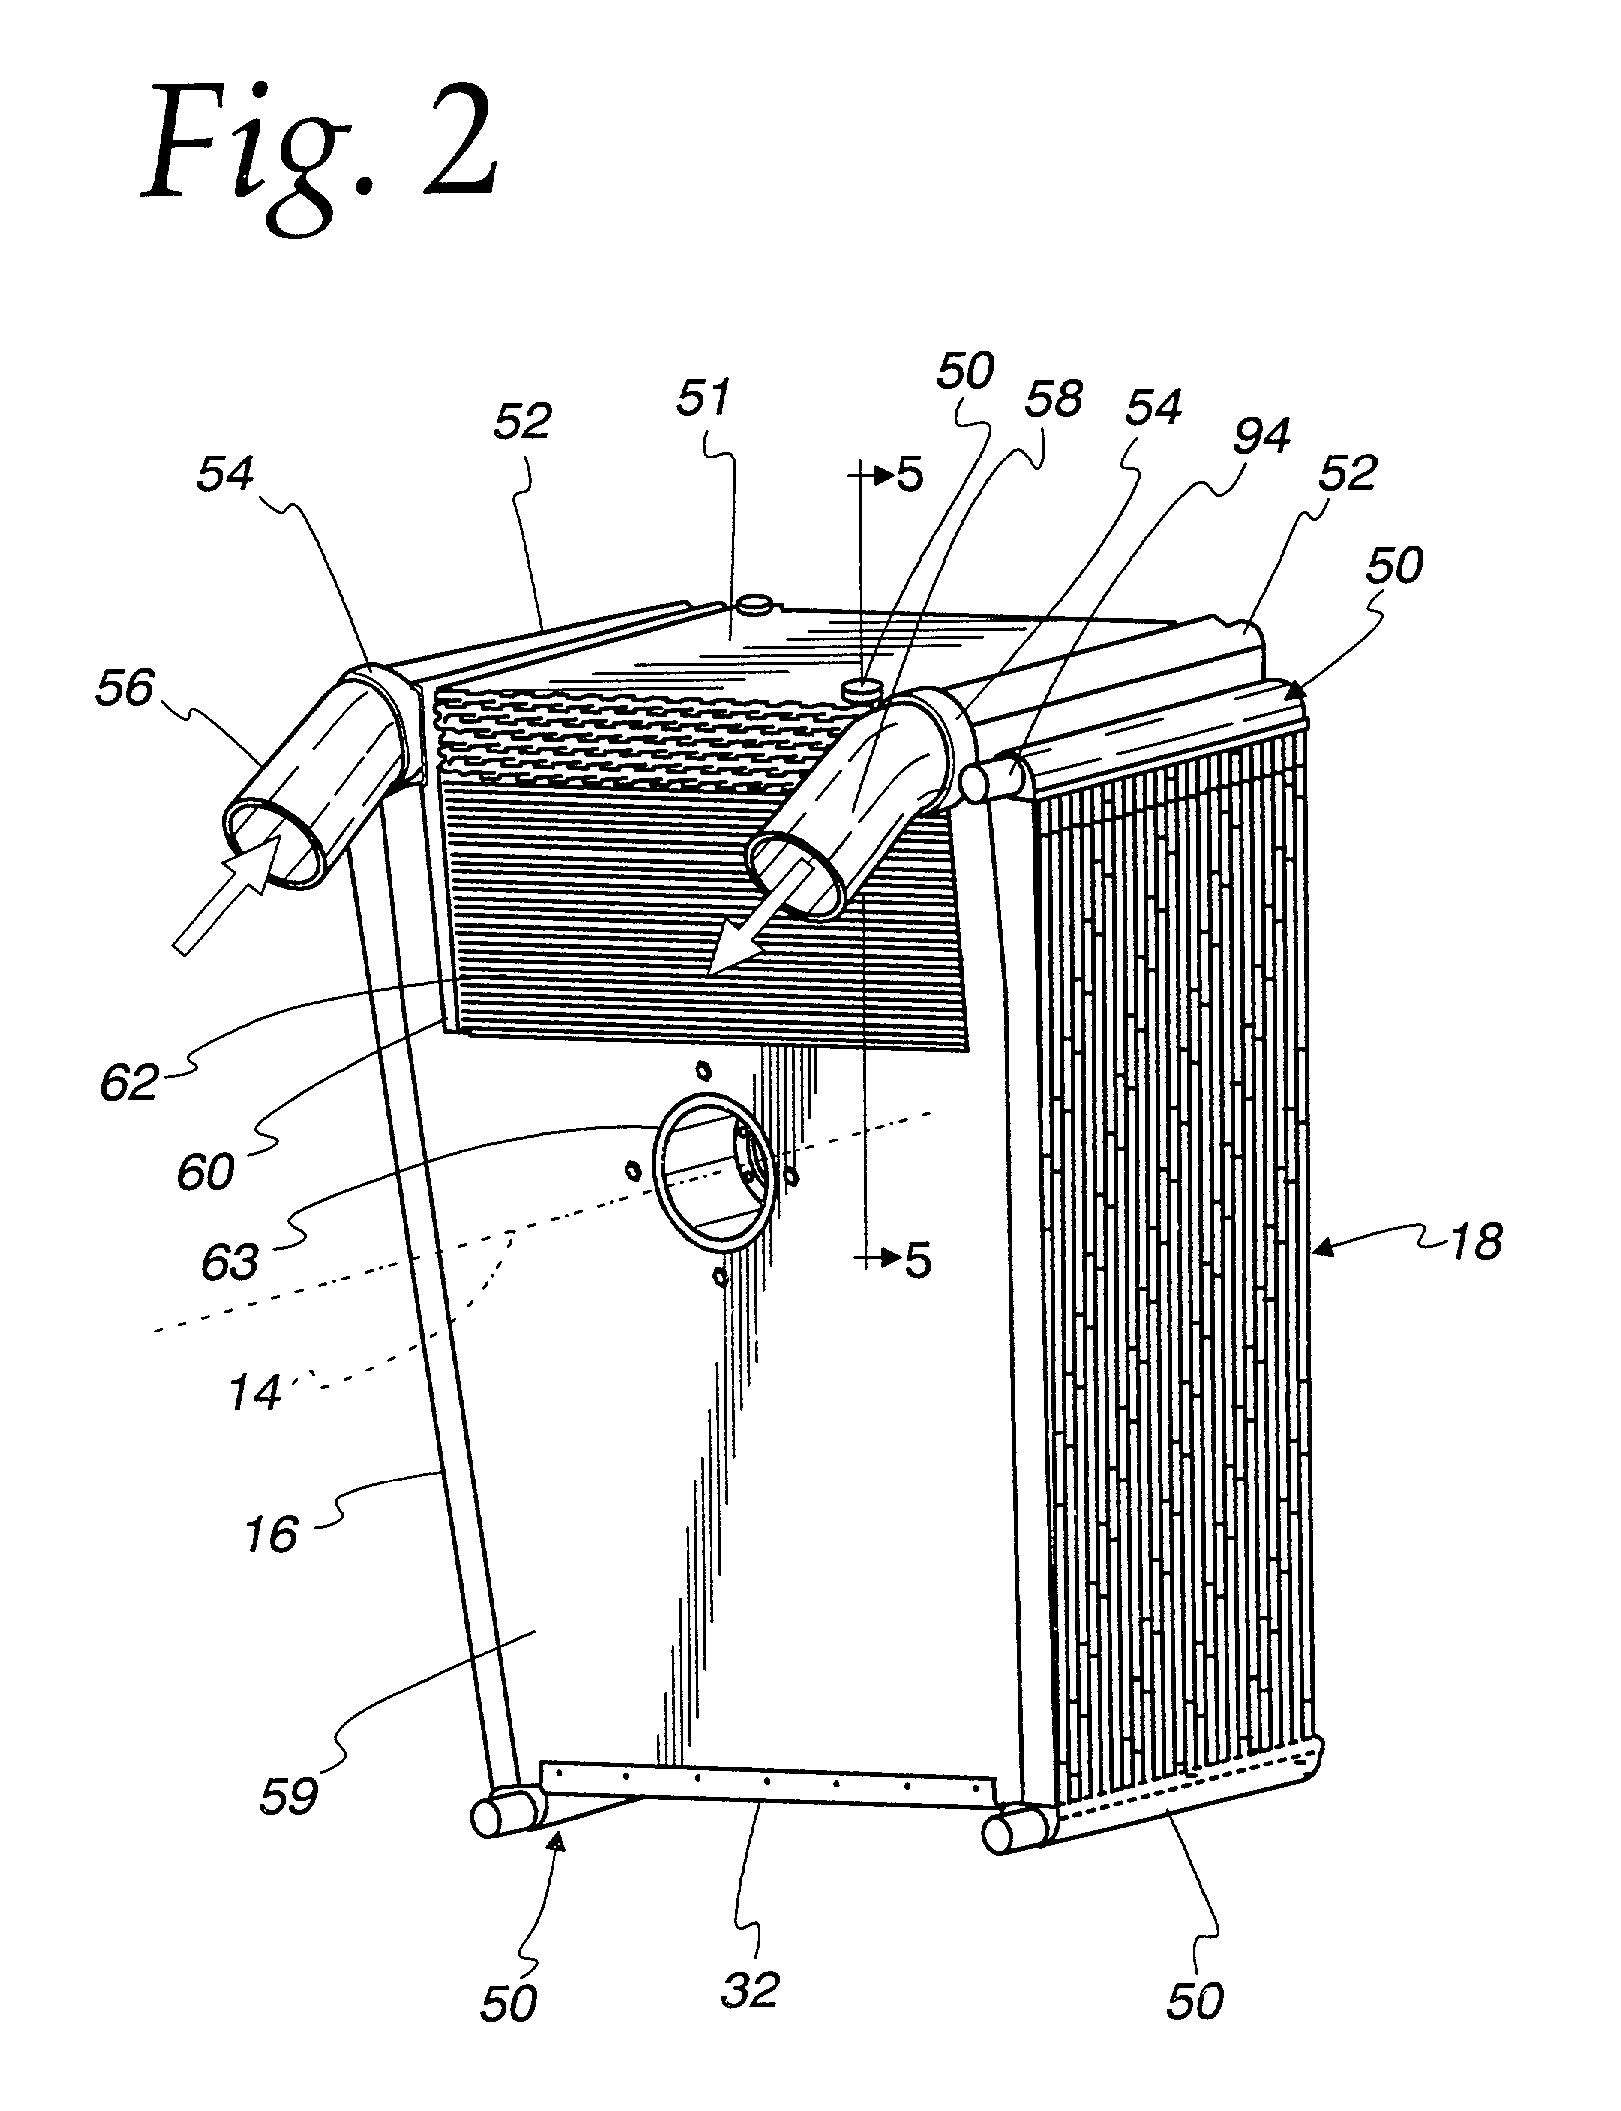 Box-like cooling system